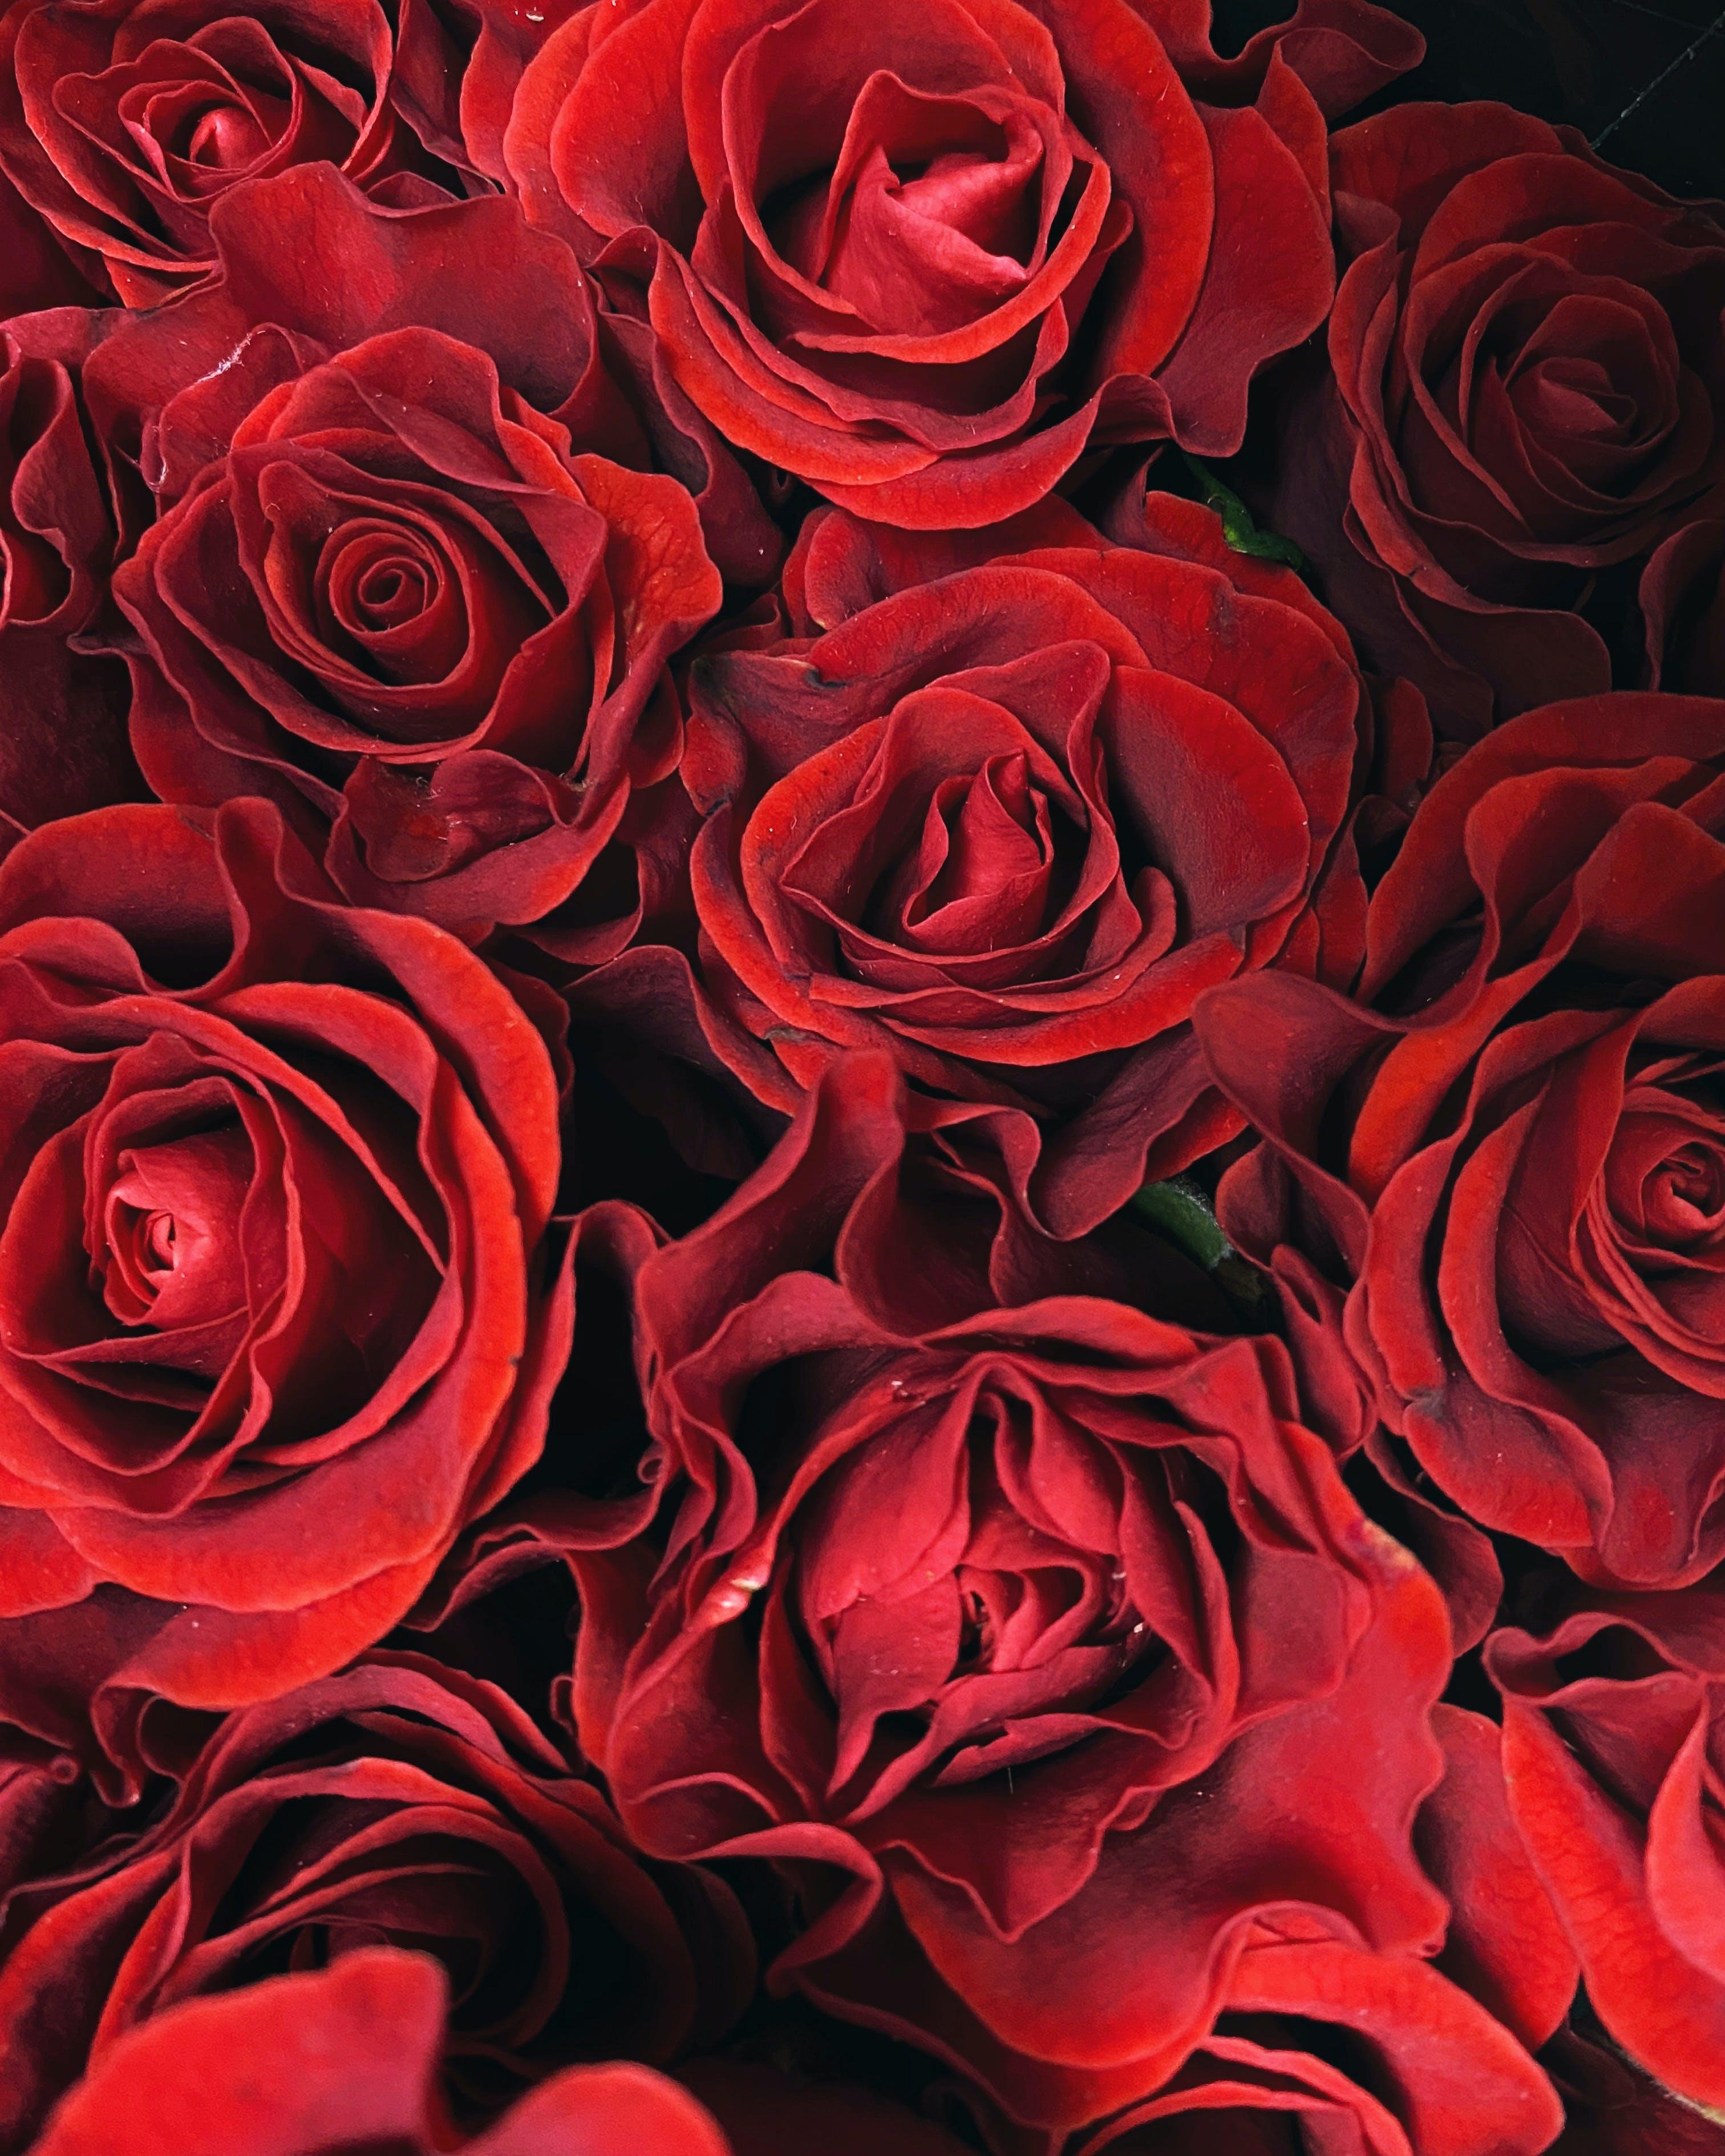 How many petals does a Red Rose have? 